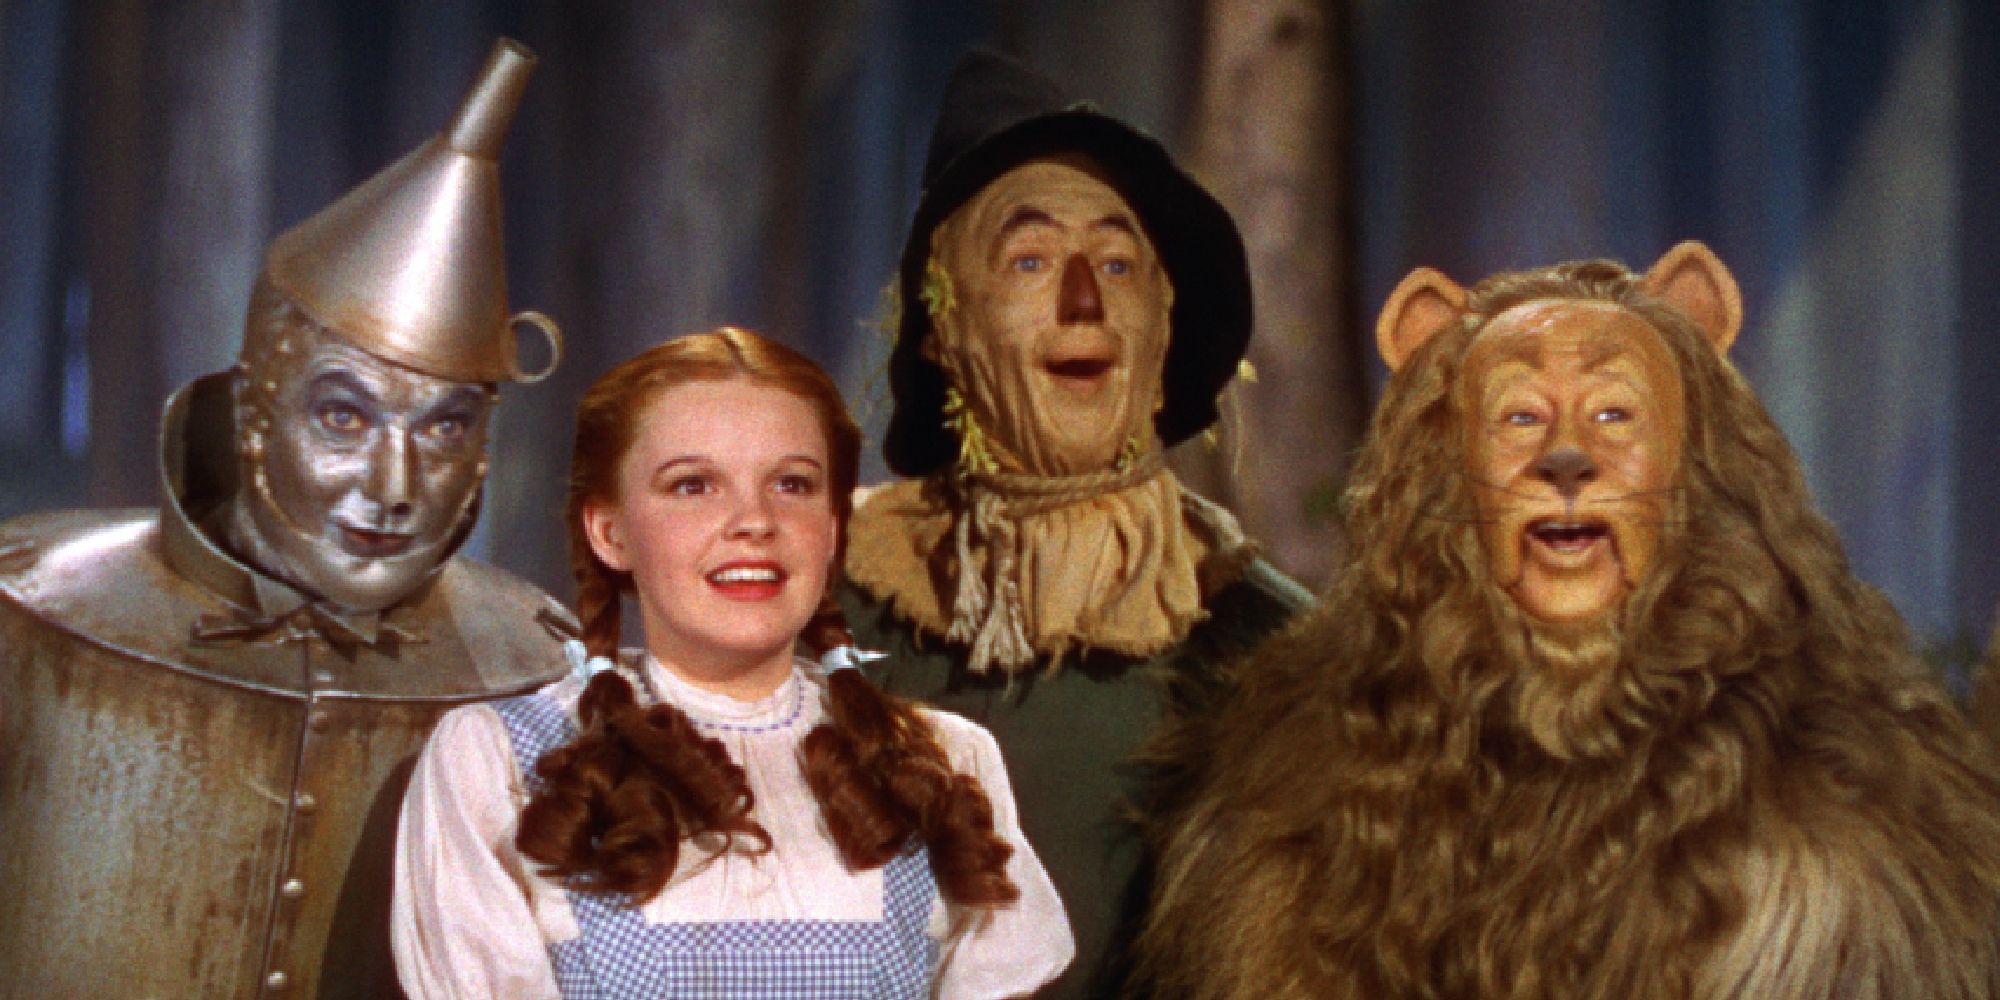 Judy Garland, Ray Bolger, Jack Haley and Bert Lahr in The Wizard of Oz